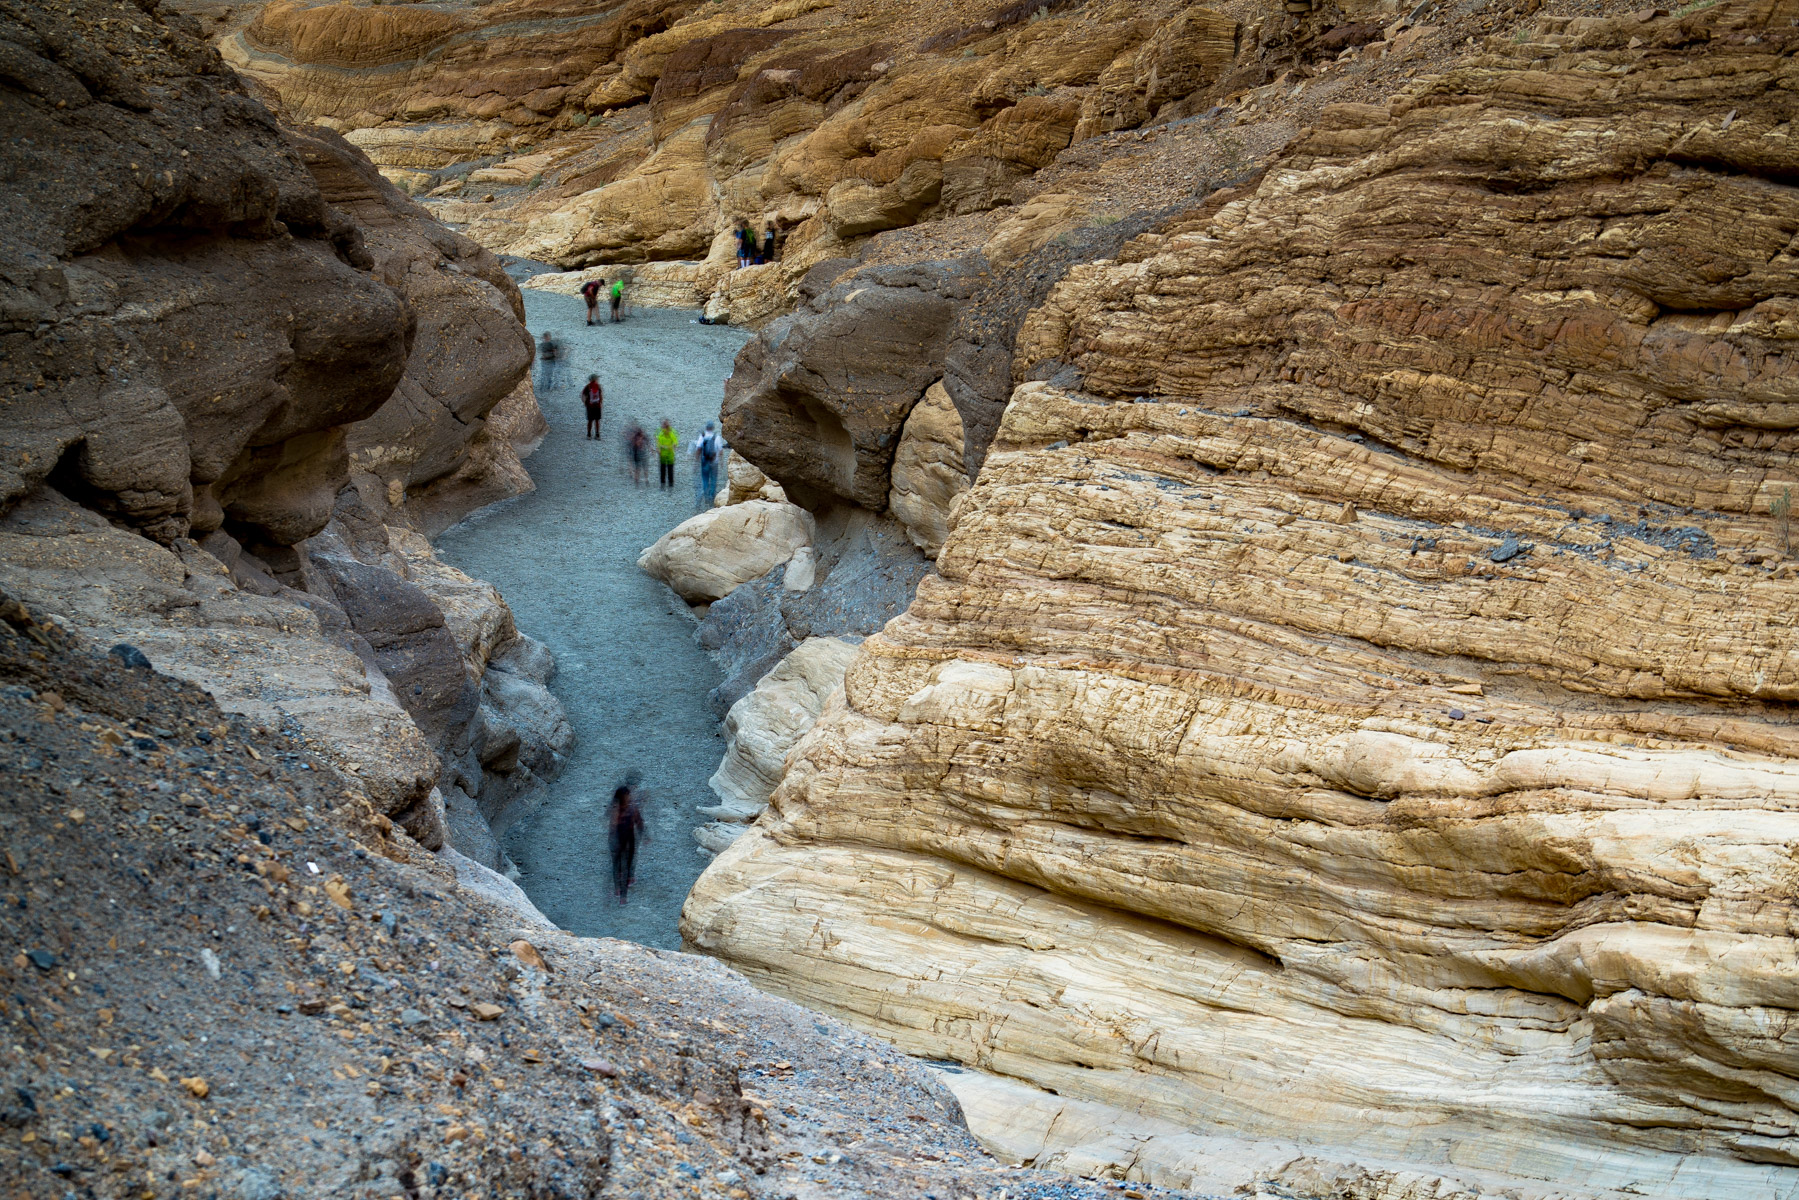 Mosiac Canyon in Death Valley National Park